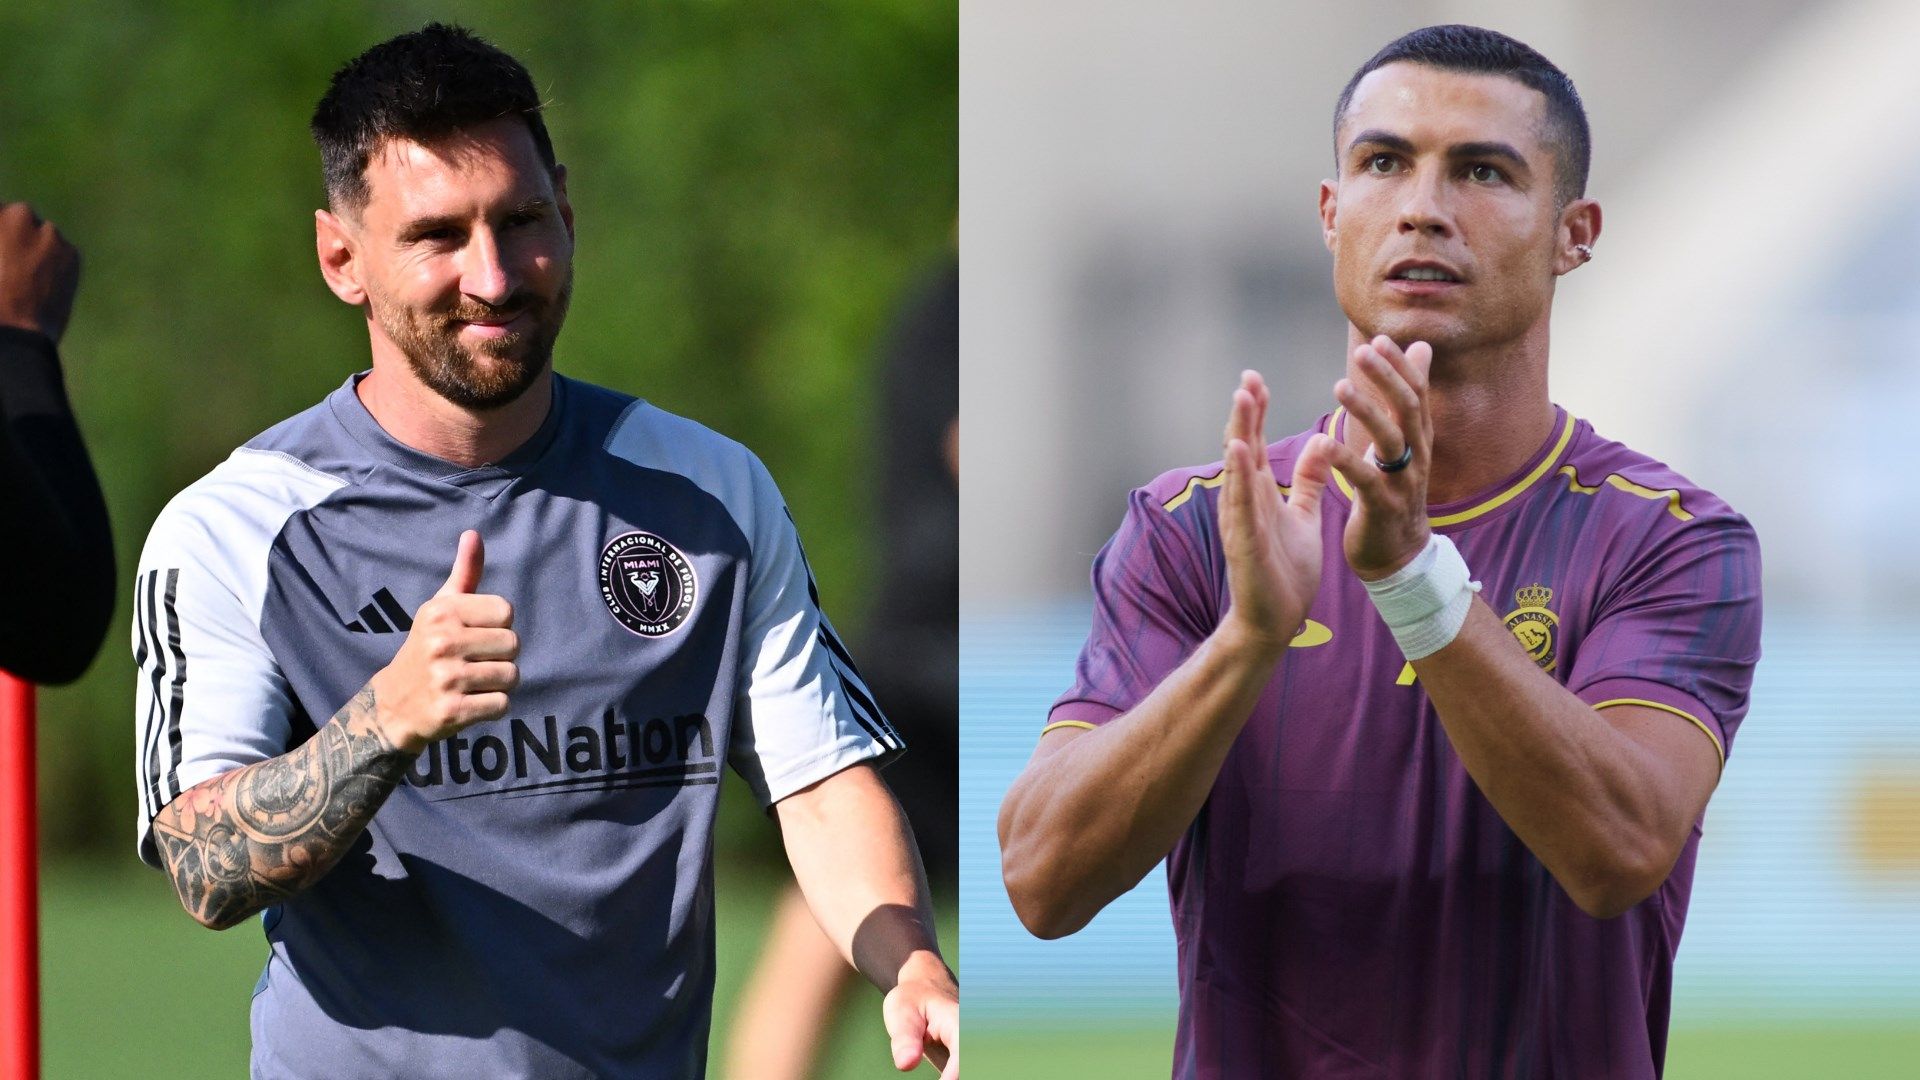 Cristiano Ronaldo vs Lionel Messi: Who is world's highest paid footballer?